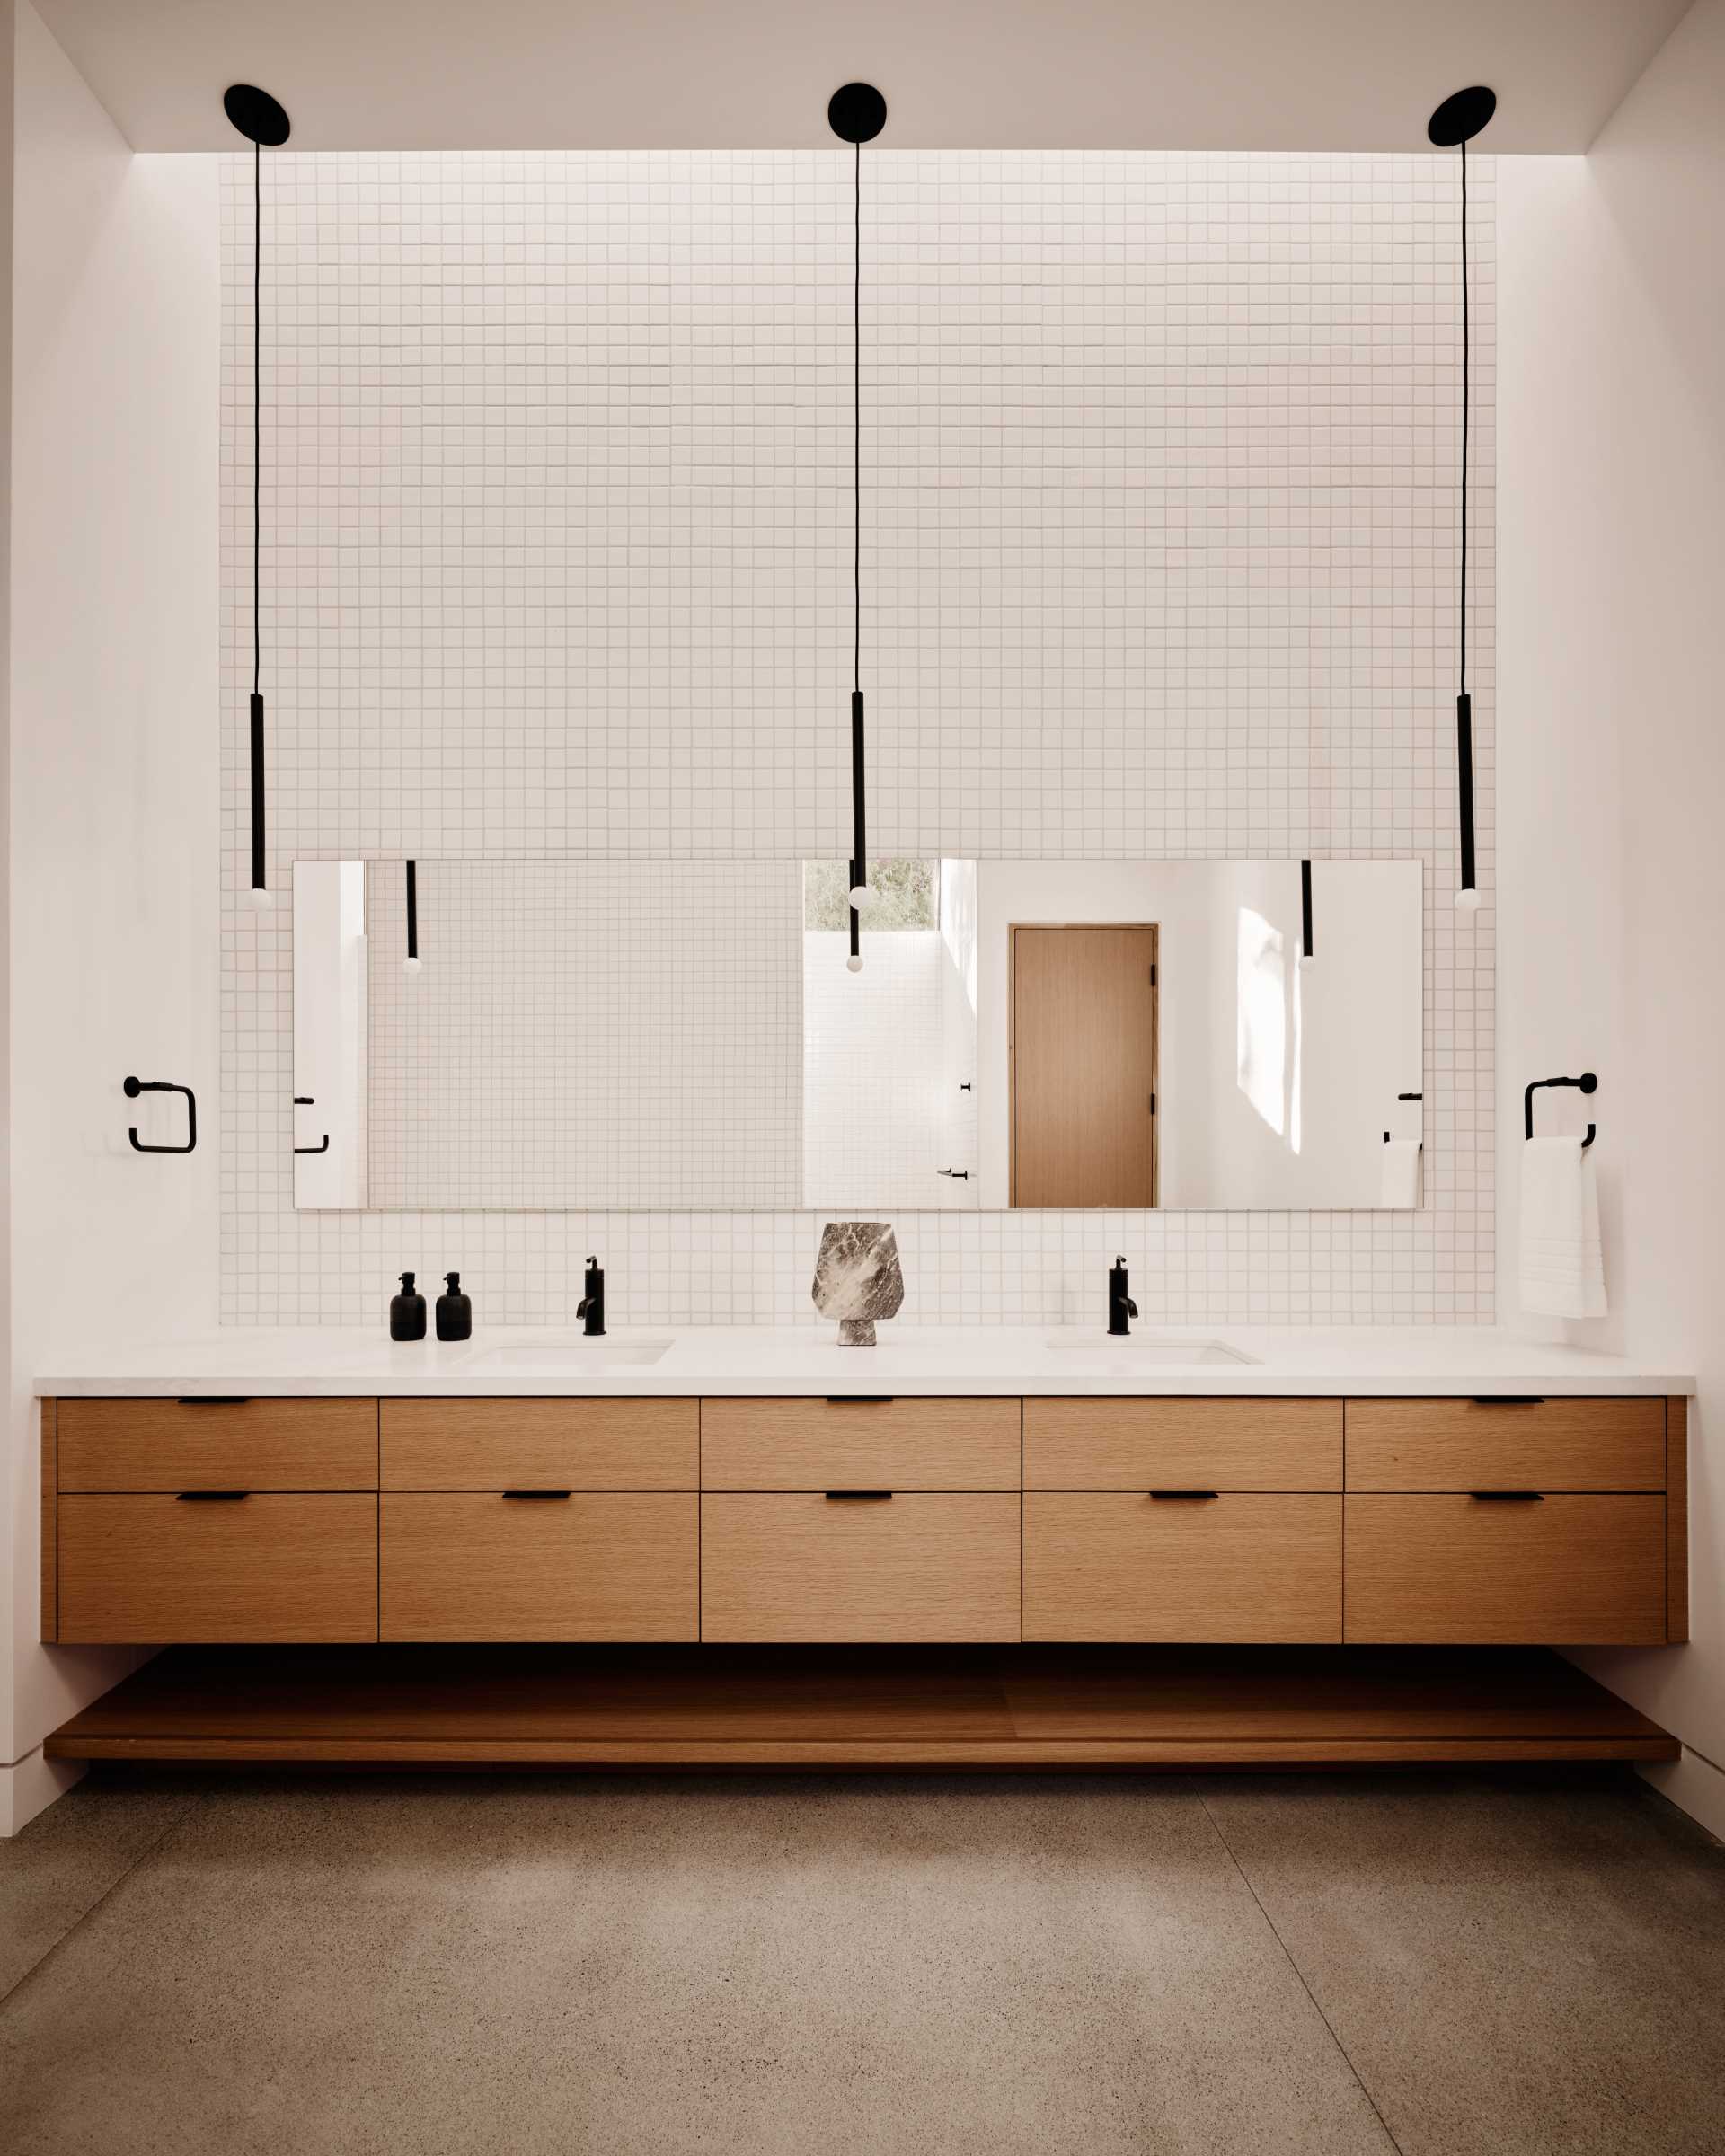 In this modern bathroom, tiles cover the walls, minimalist black pendant lights hang from the ceiling, and a wood vanity spans the wall.